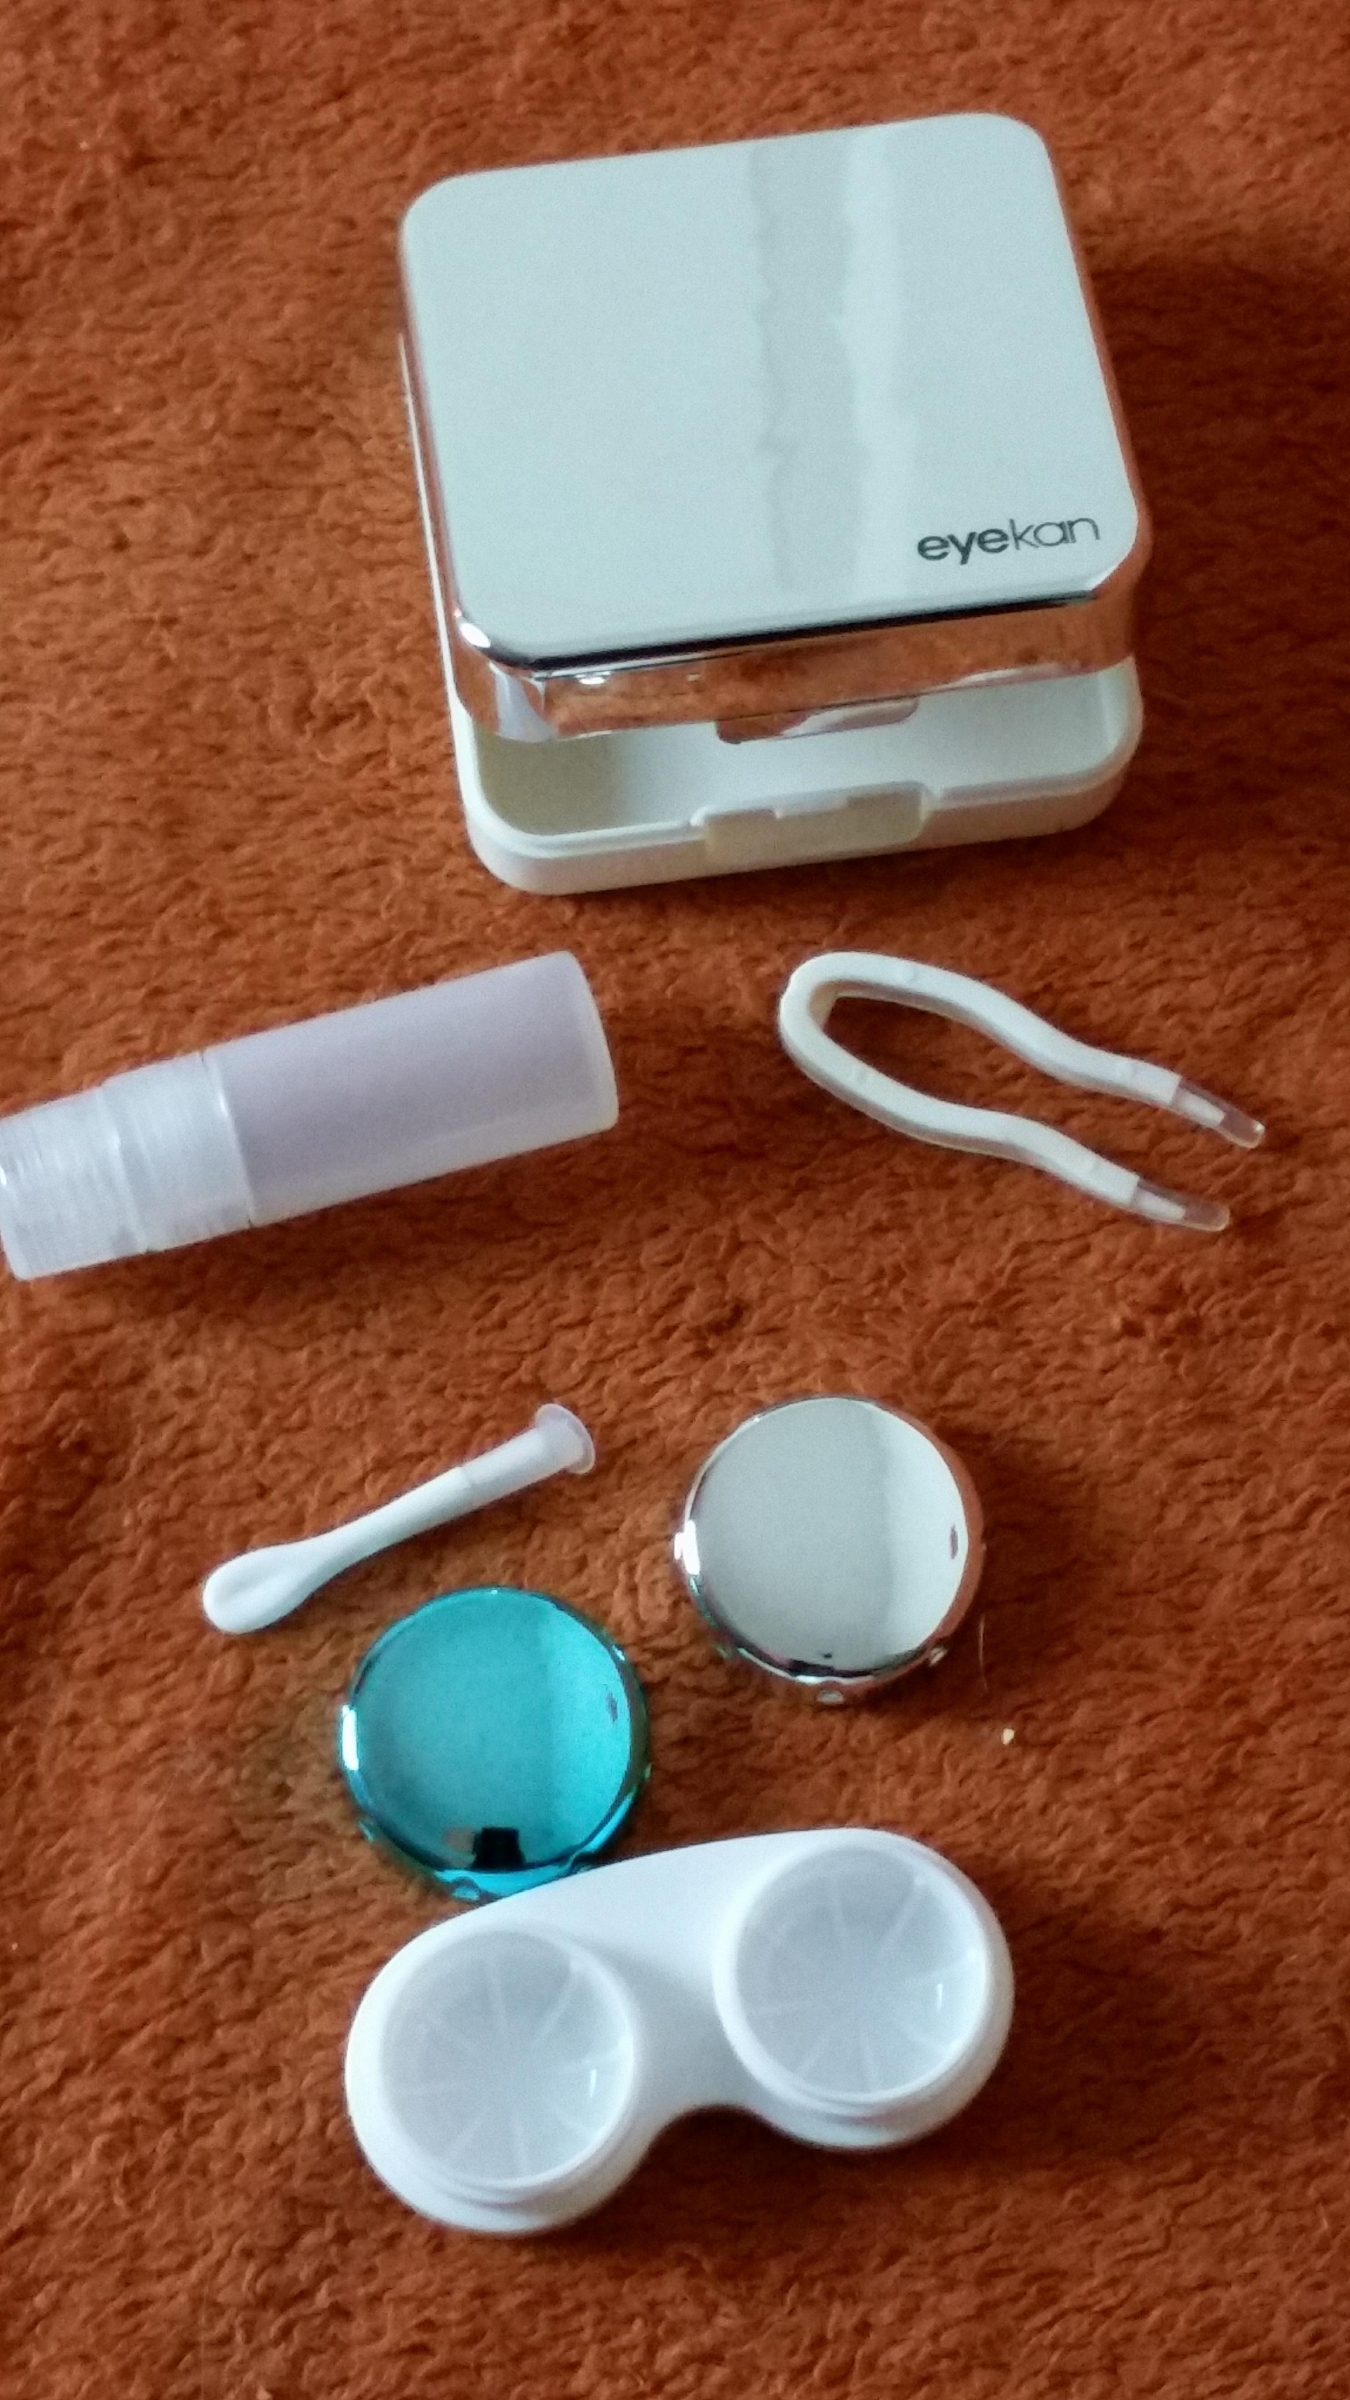 Perfect for all of your contact lens needs, very small & highly portable kit with mirror, tweezers, & LOTS of extras, everything you need on the go.